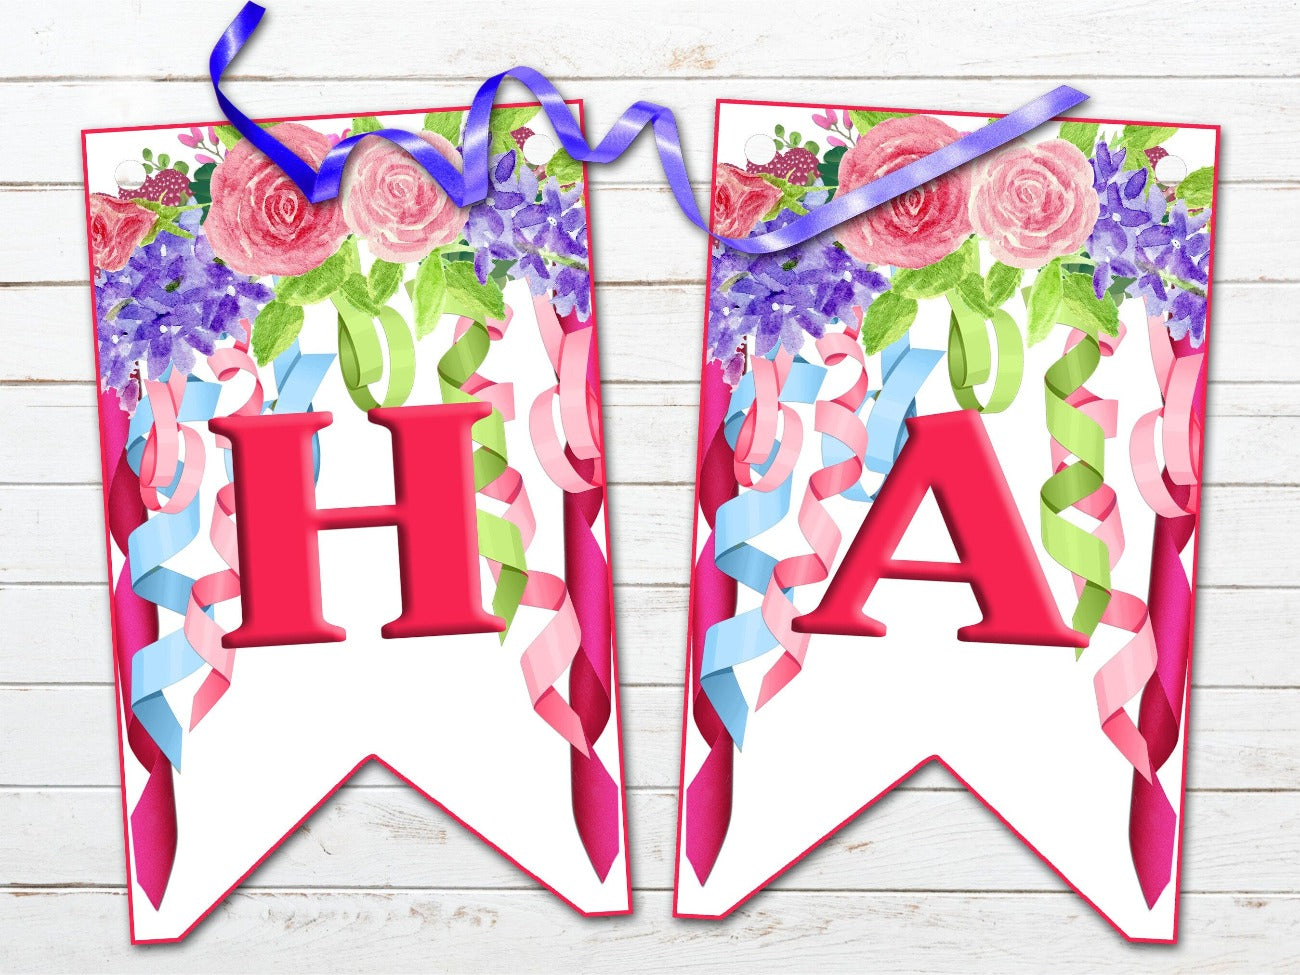 BELTANE BANNER, Pagan Altar Garland Decoration, H & A, each flag has pastel ribbons and flowers in colors of pink, mauve, green and blueoon a white background - Morgana Magick Spell